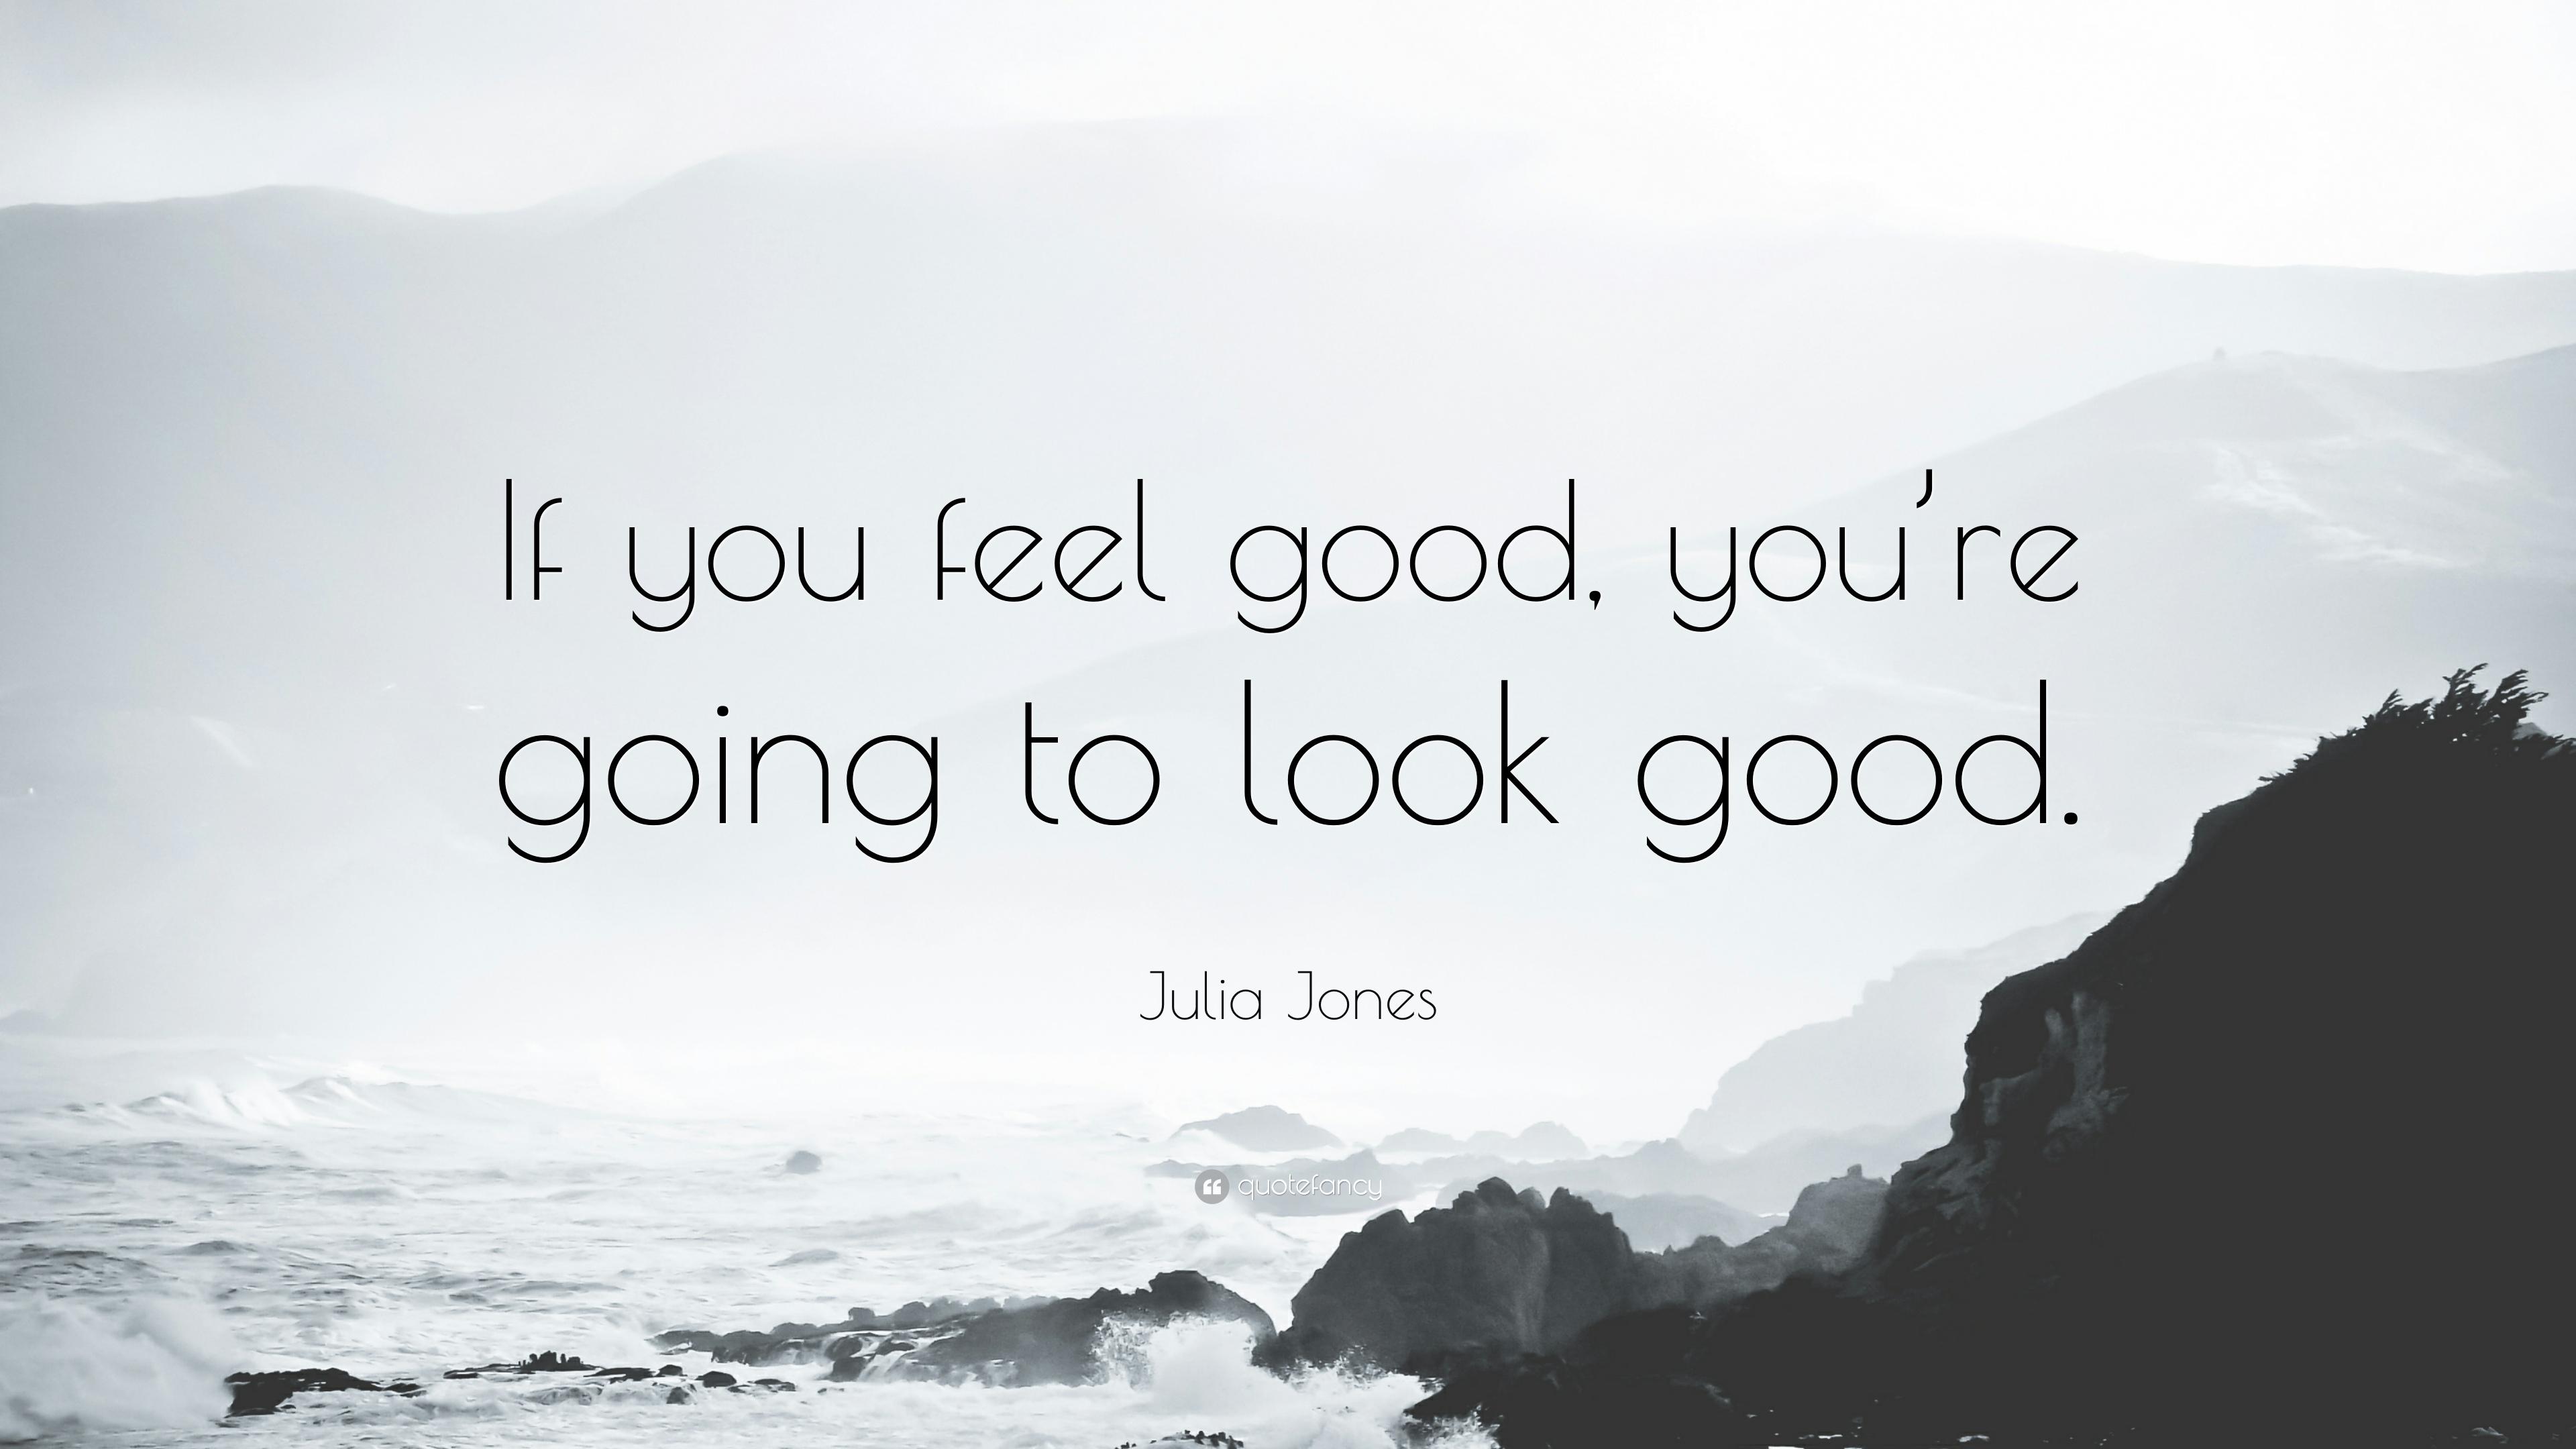 Julia Jones Quote: “If you feel good, you're going to look